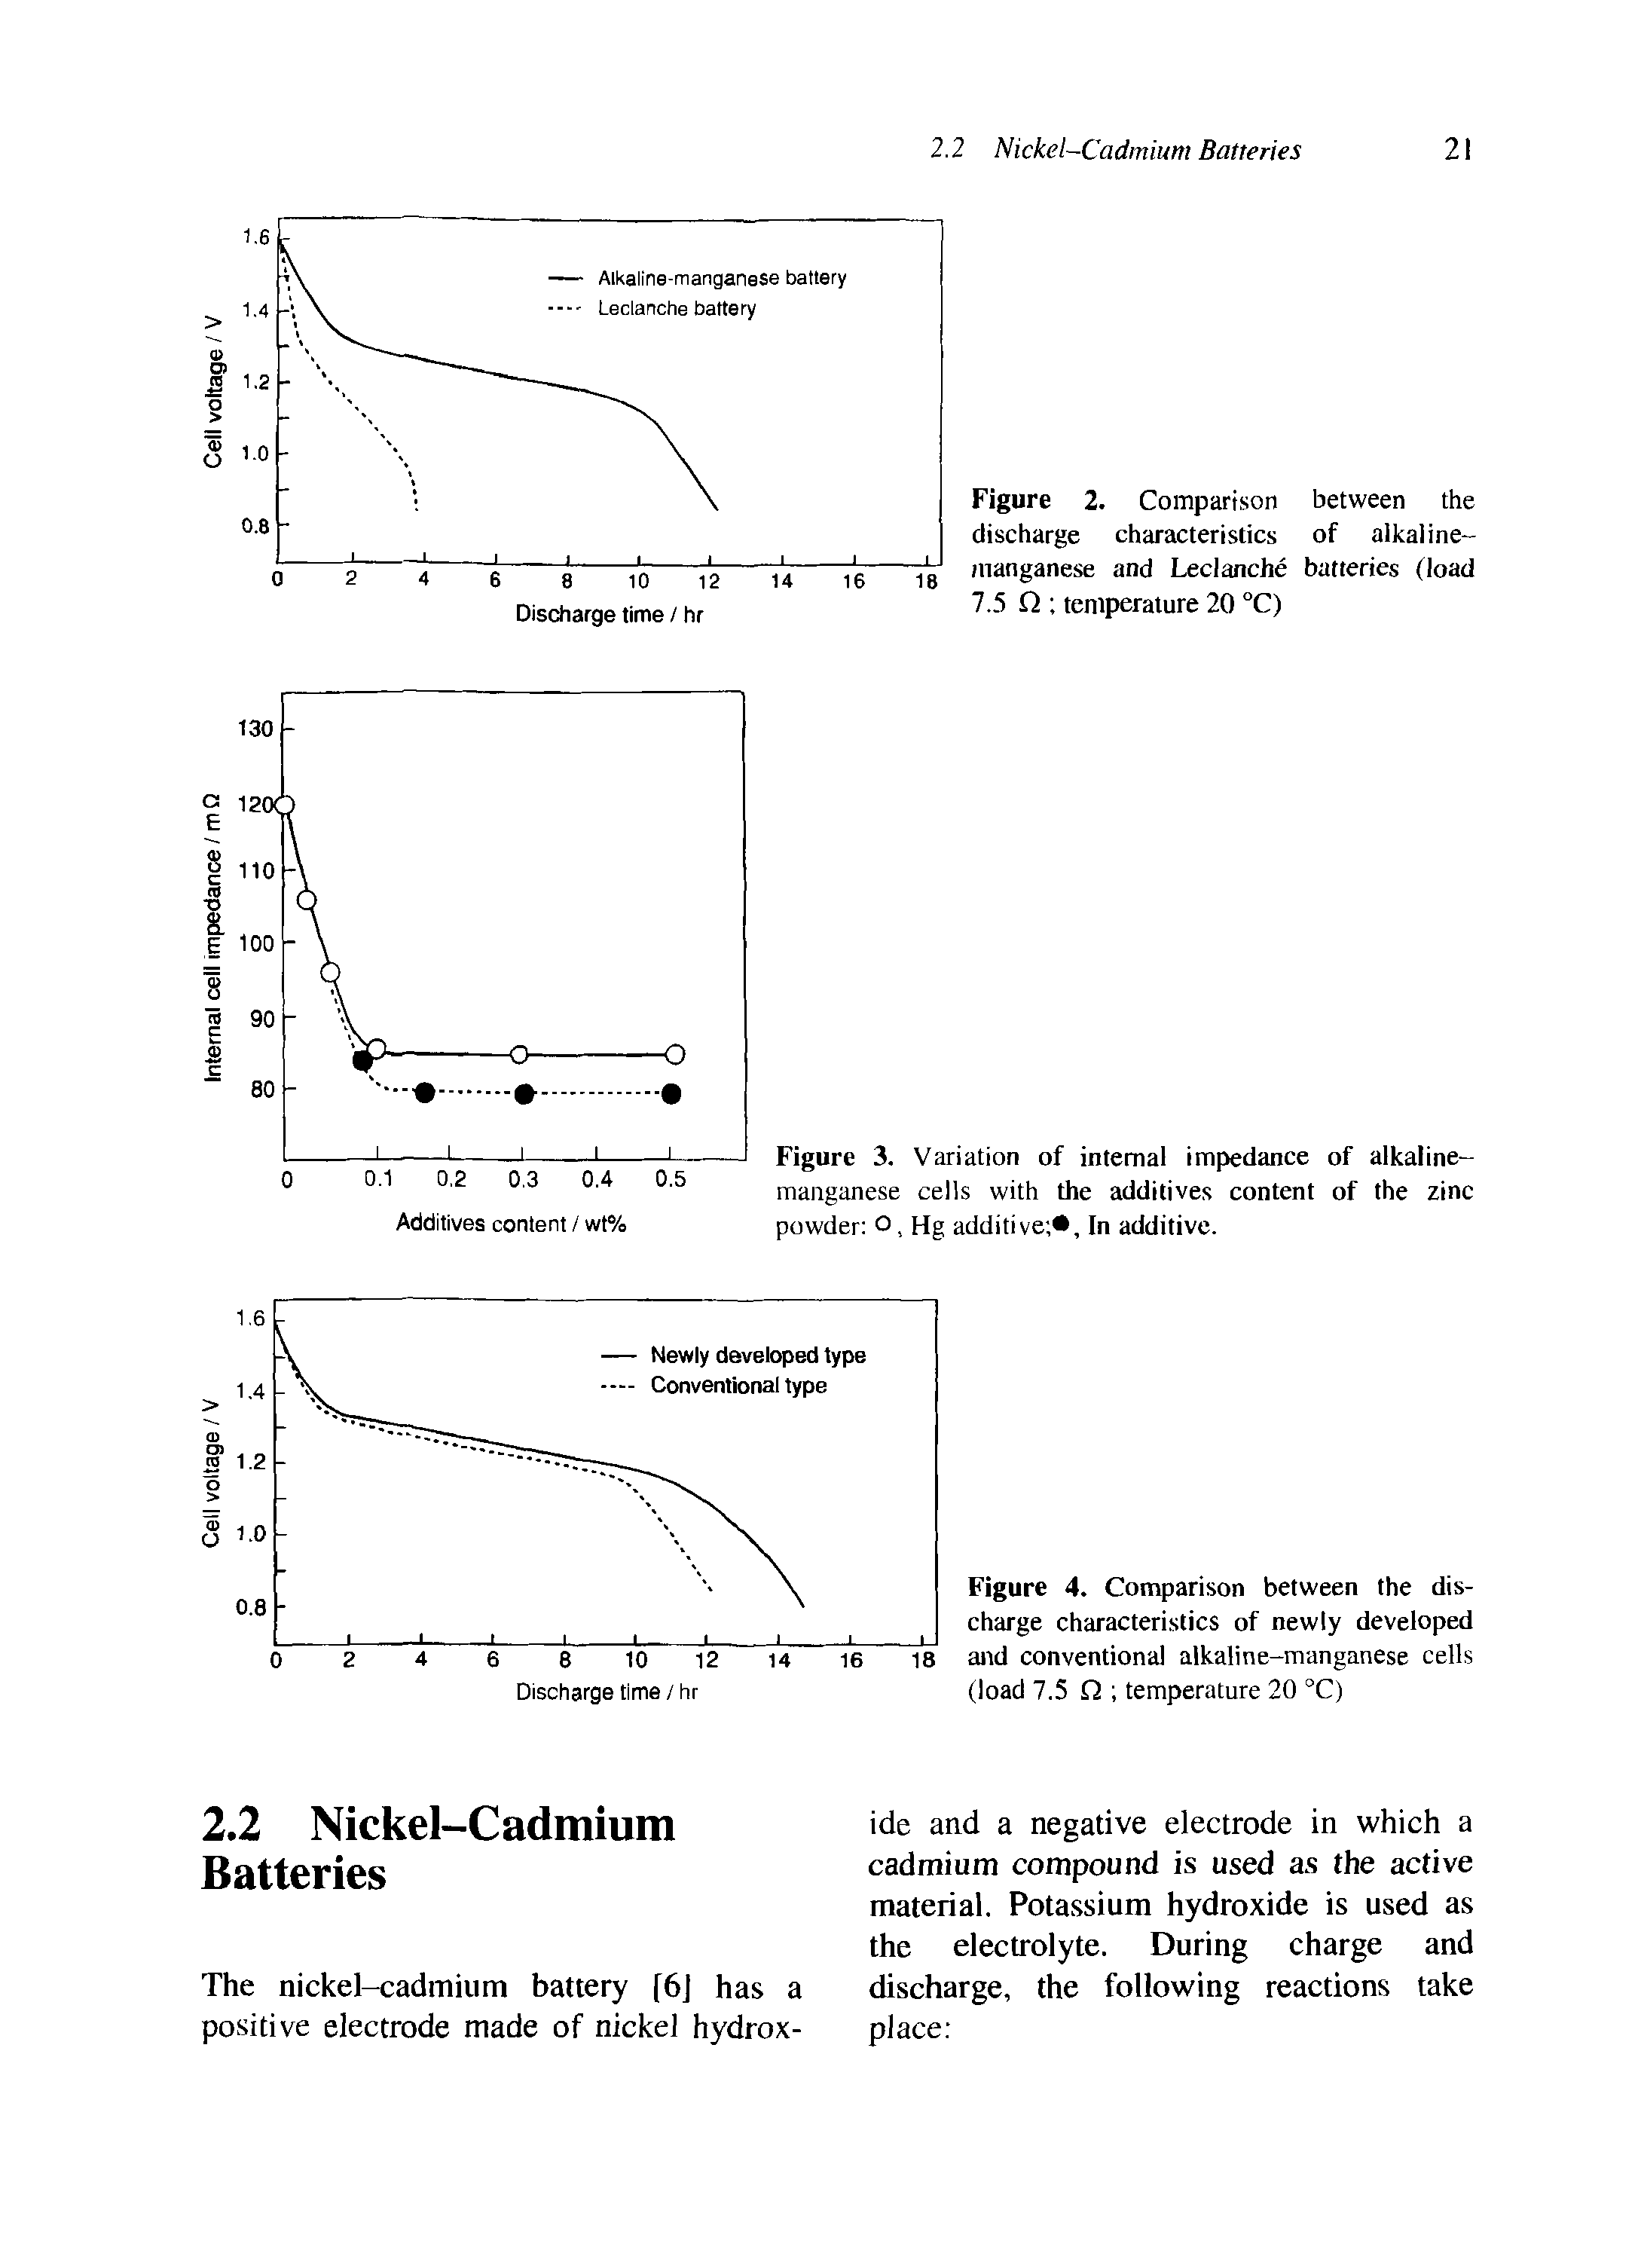 Figure 3. Variation of internal impedance of alkaline-manganese cells with the additives content of the zinc powder o, Hg additive , In additive.